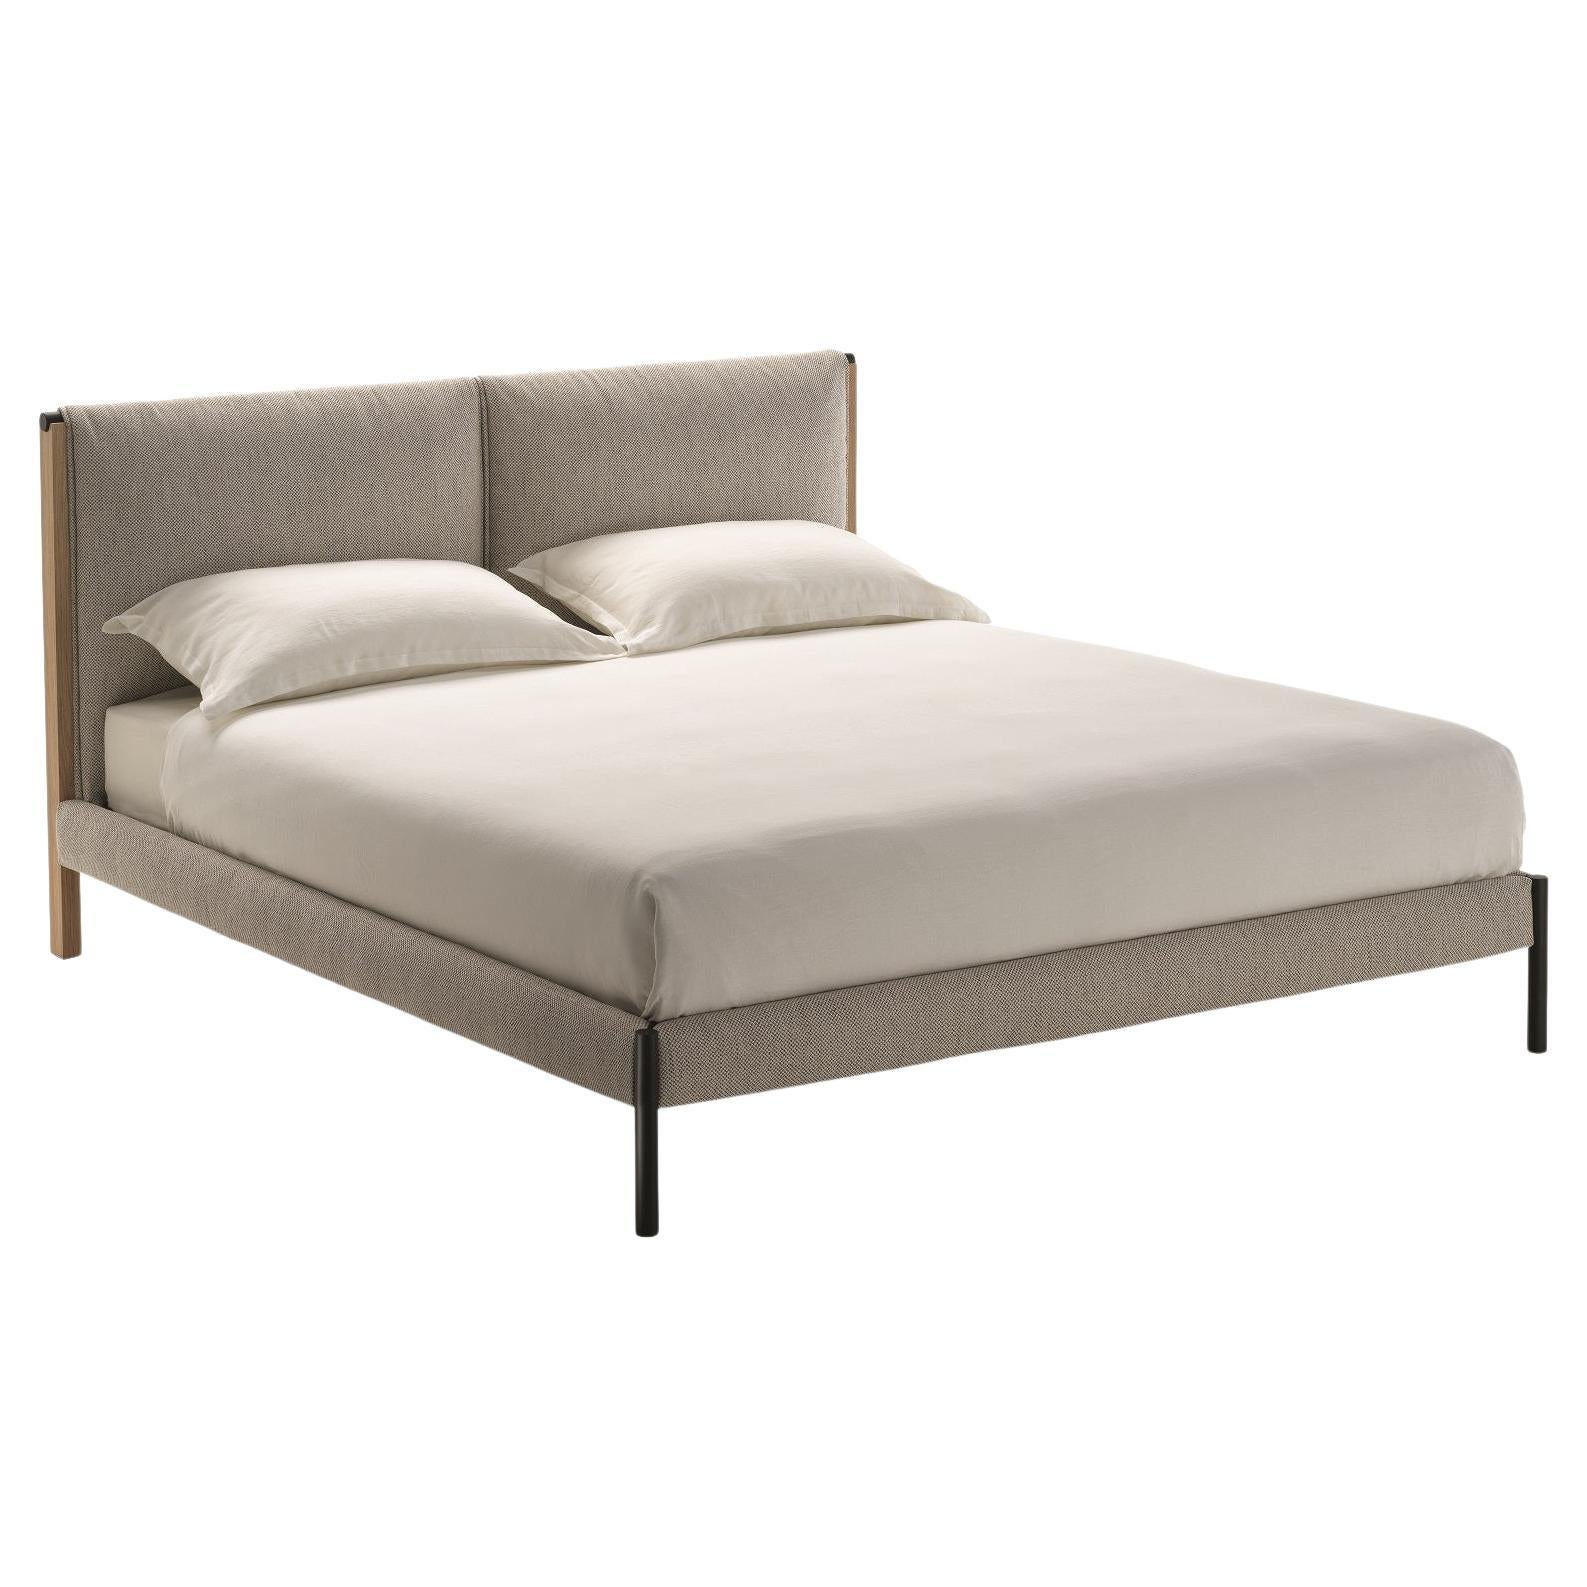 Zanotta Large Ricordi Bed with Single Springing in Toce Upholstery